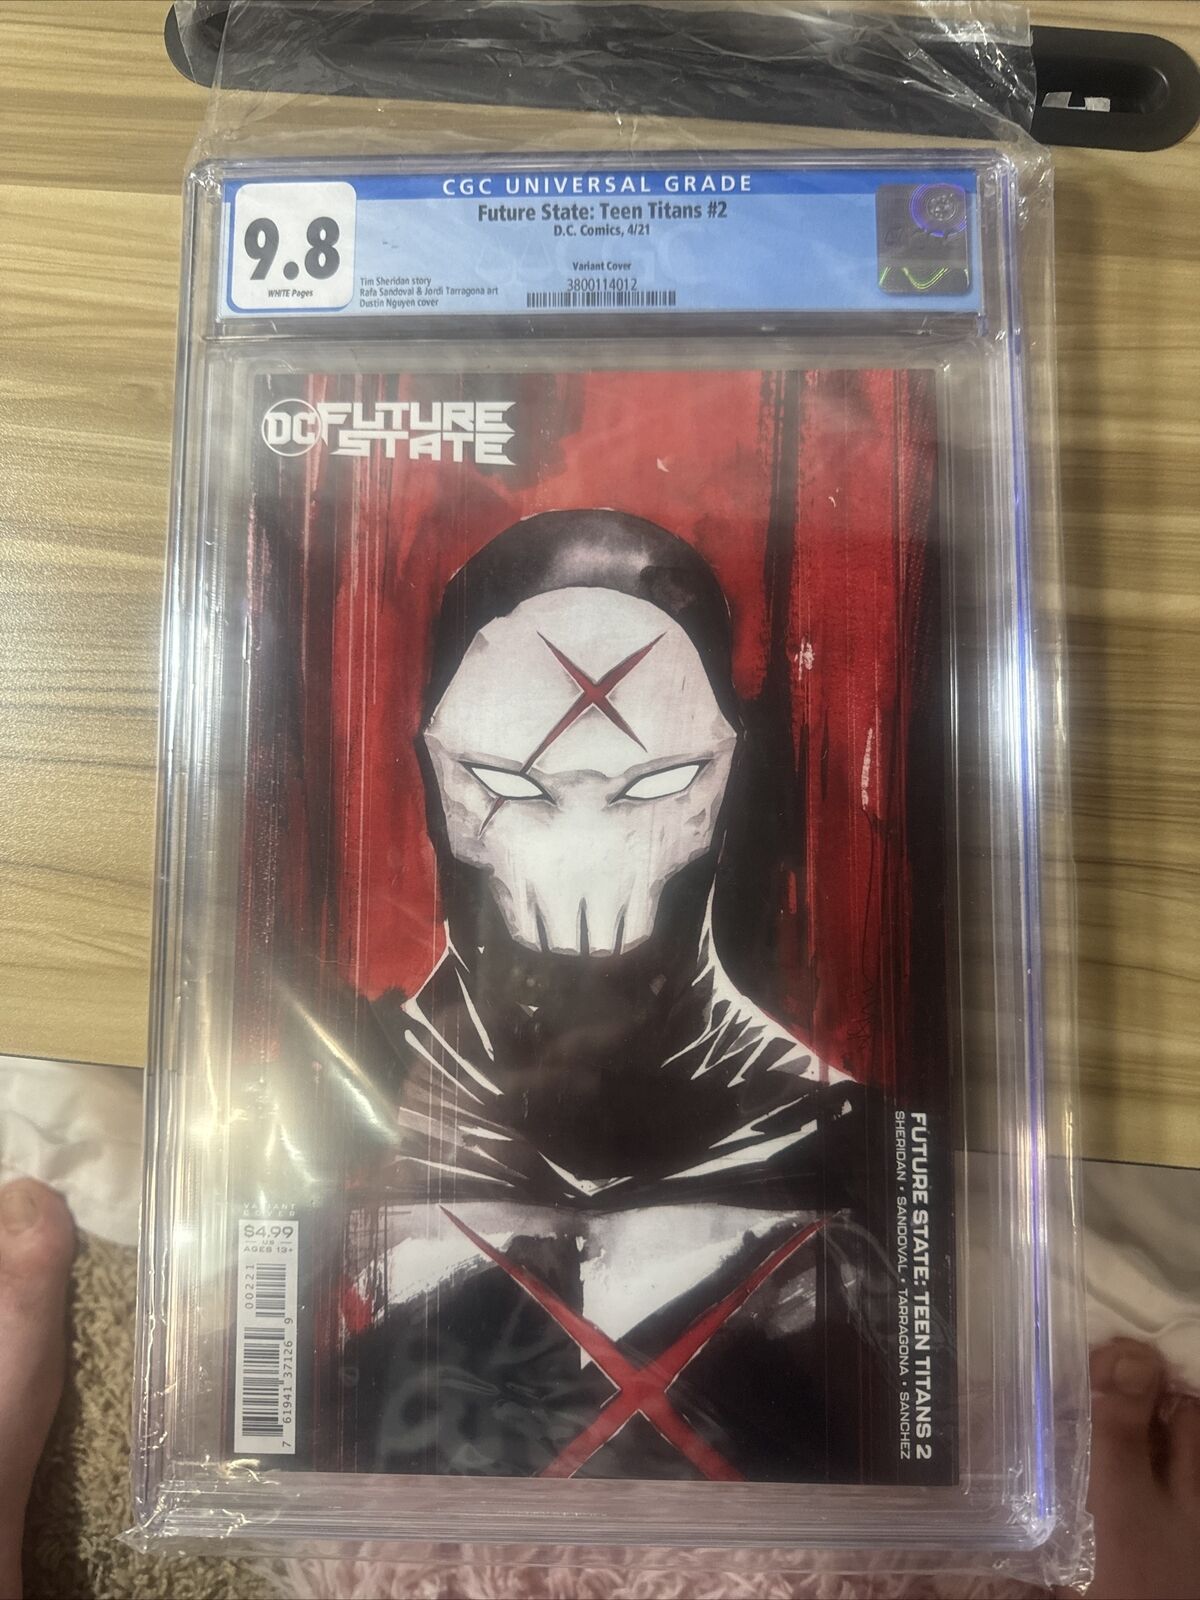 Future State: Teen Titains #2 CGC 9.8 variant Red x